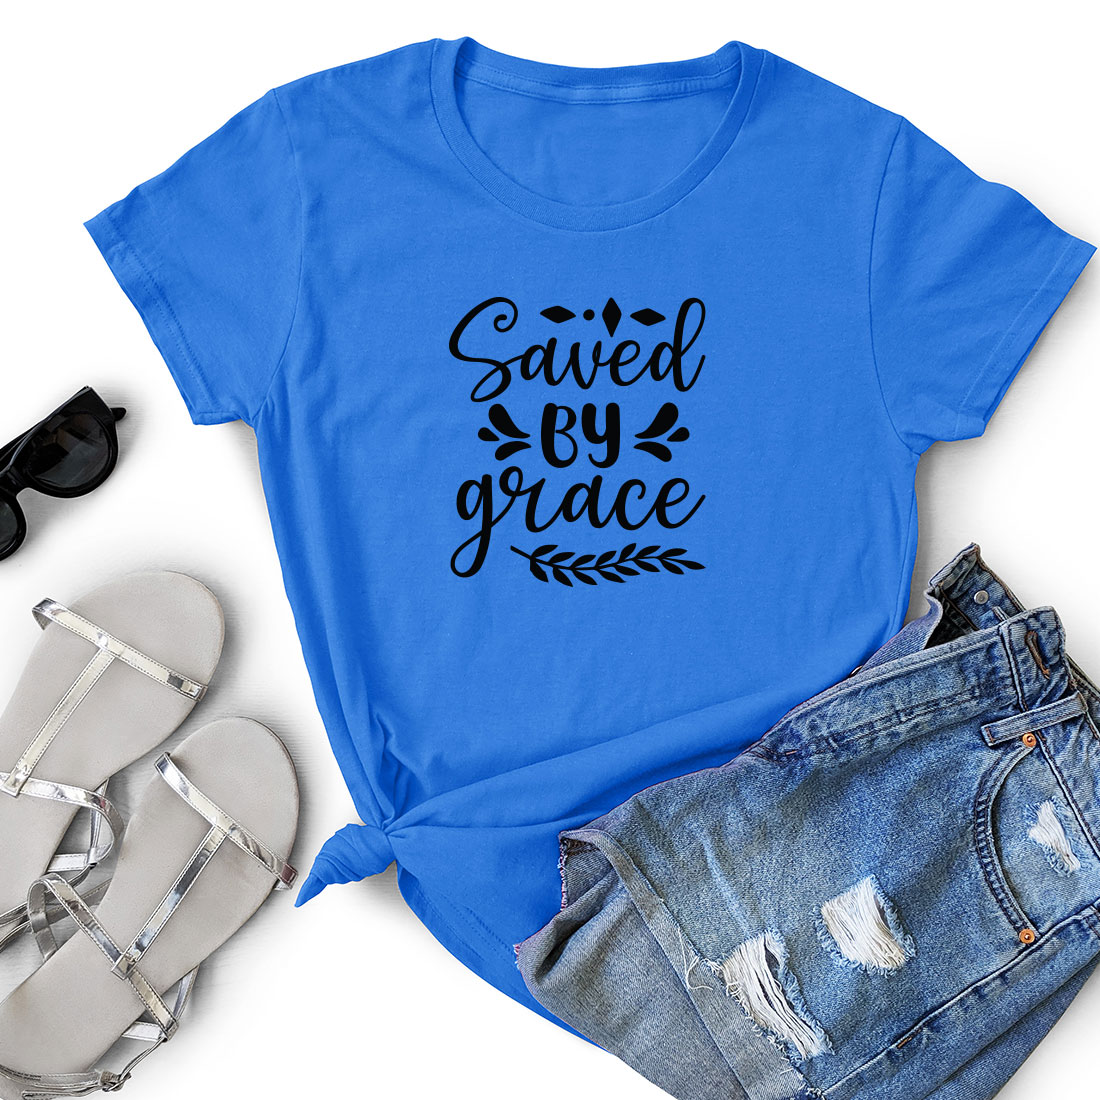 Blue shirt that says saved by grace next to a pair of shorts.